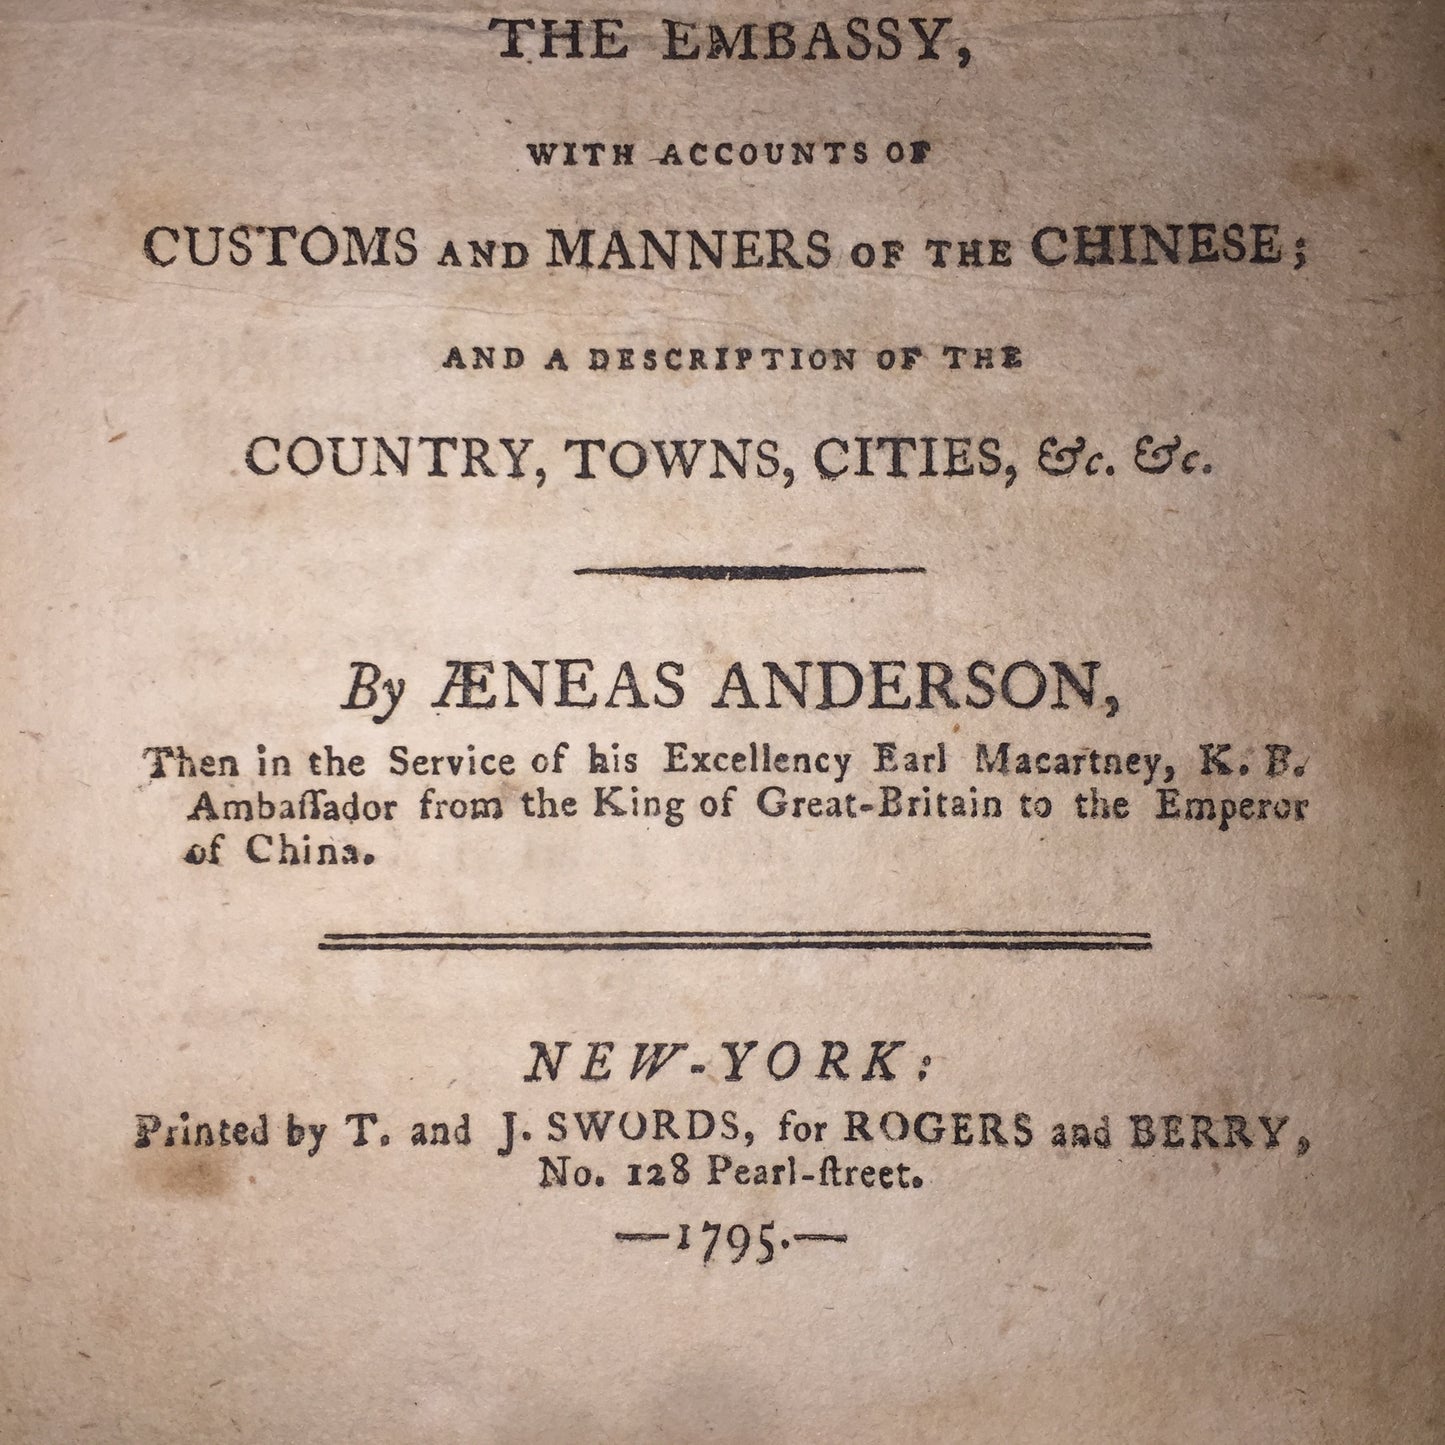 A Narrative of the British Embassy to China in the Years 1792, 1793, and 1794 - Aeneas Anderson - 1st American Edition - 1795